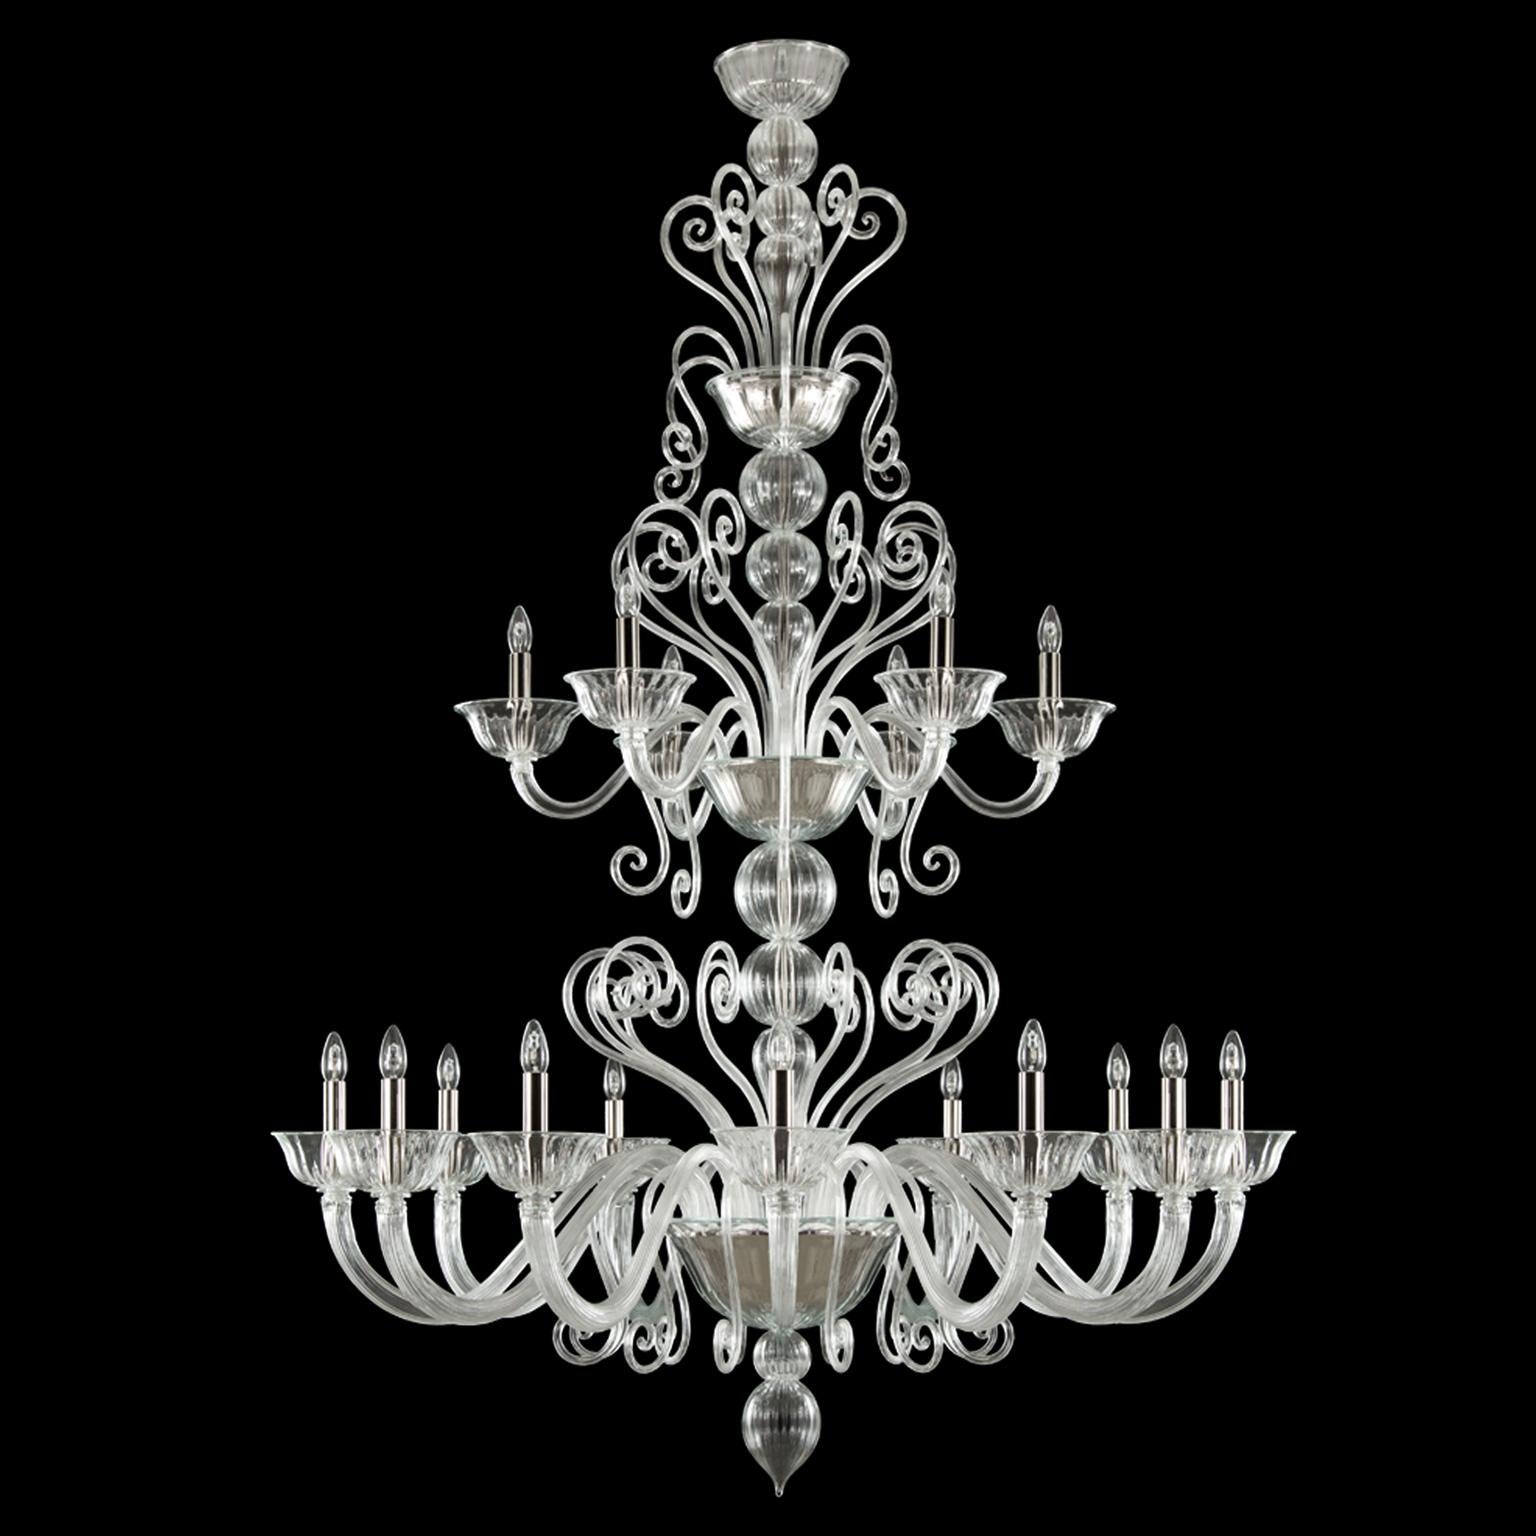 Gatsby naked chandelier 12+6 arms clear artistic Murano glass by Multiforme
The Venetian chandelier Gatsby is the perfect combination of elegant and modern elements. The use of color featuring bright tones, the surface with straight ribs, the